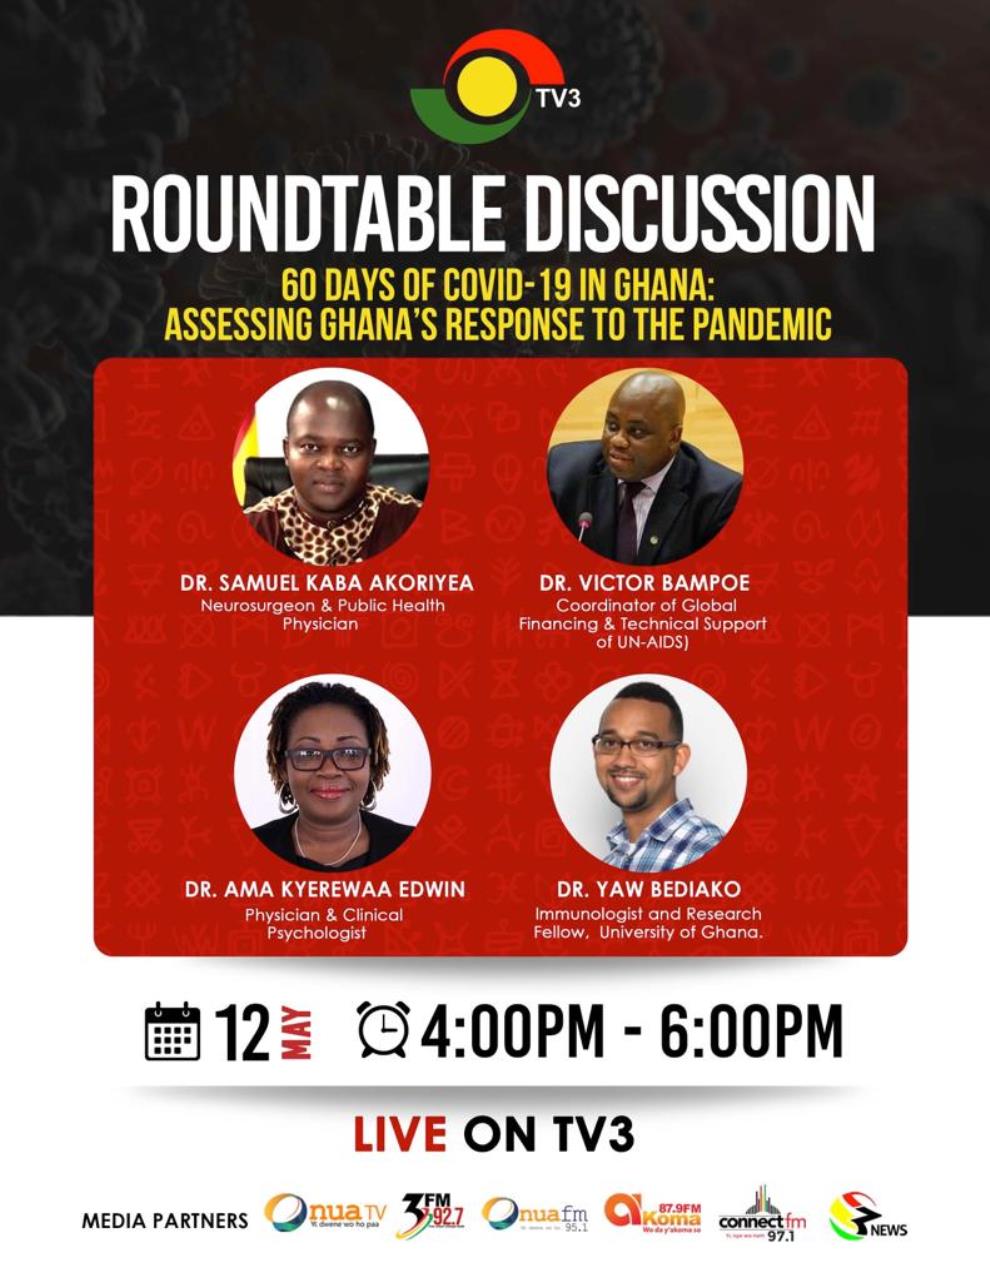 TV3 Presents Roundtable Discussion On 60 Days Of Covid-19 In Ghana